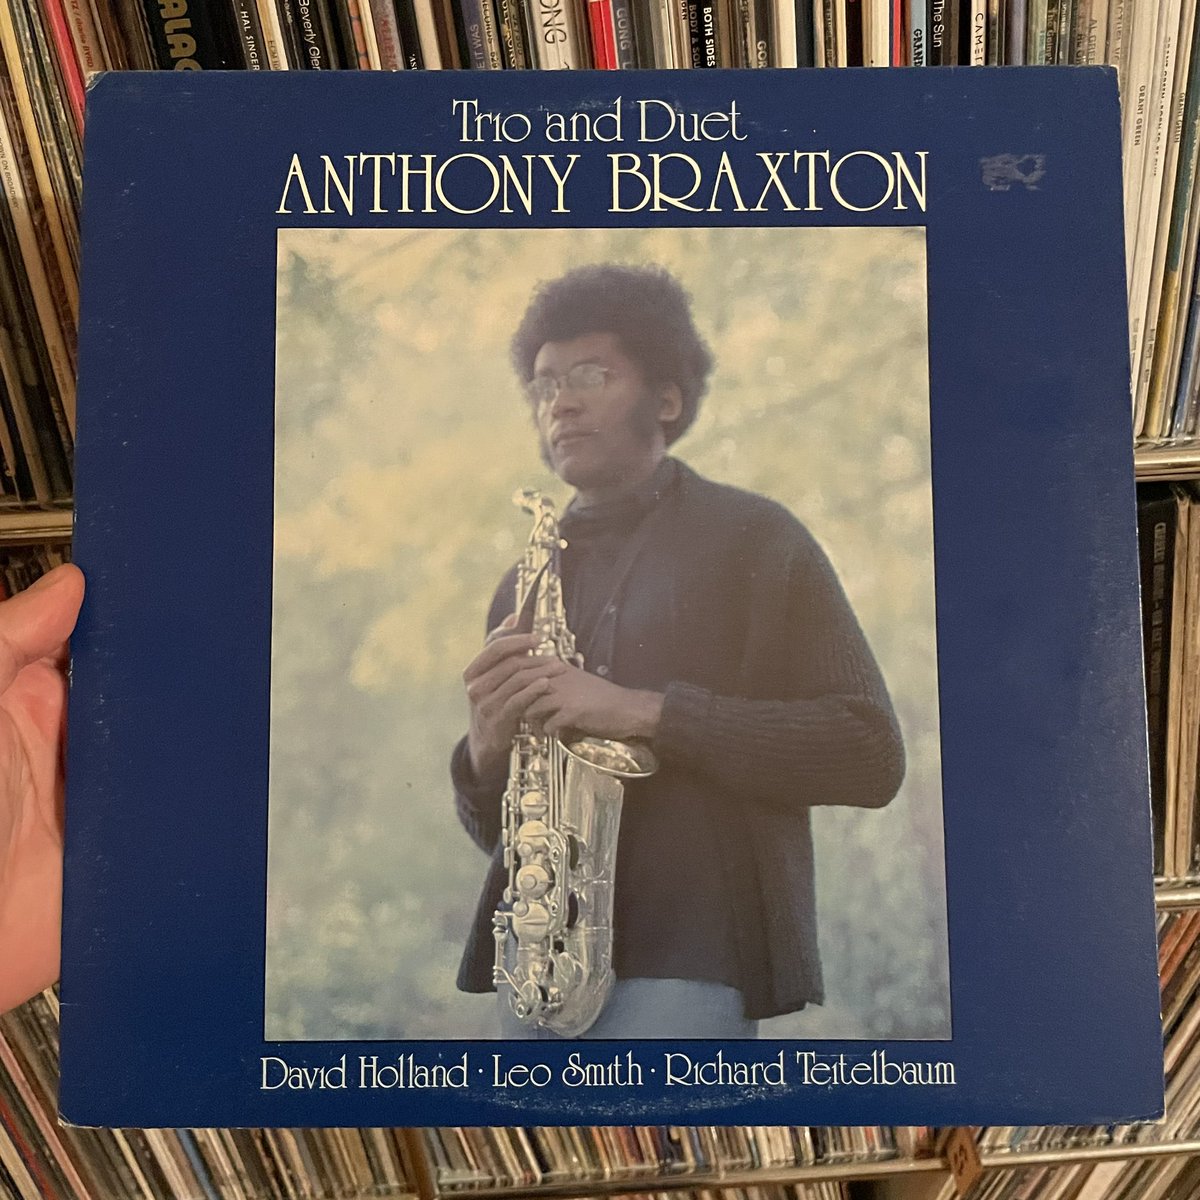 #NowPlaying Anthony Braxton - Trio and Duet (Sackville Recordings, 1974). Trio with Leo Smith and Richard Teitelbaum ; duet with Dave Holland.